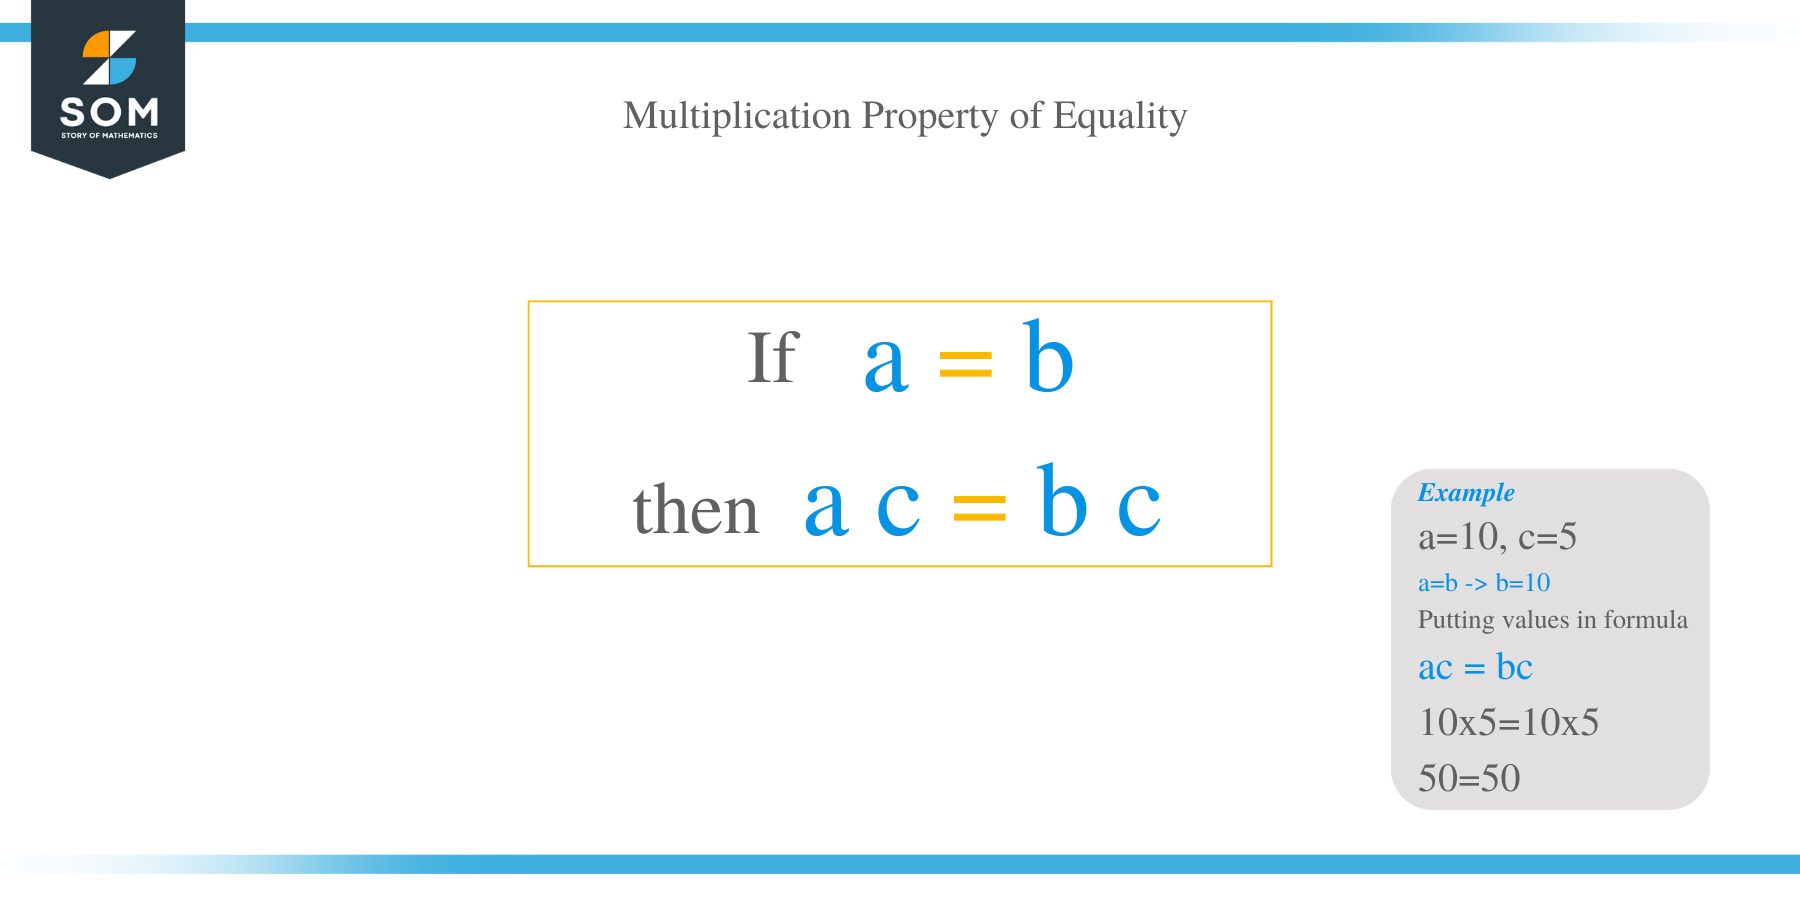 What Is the Multiplication Property of Equality?